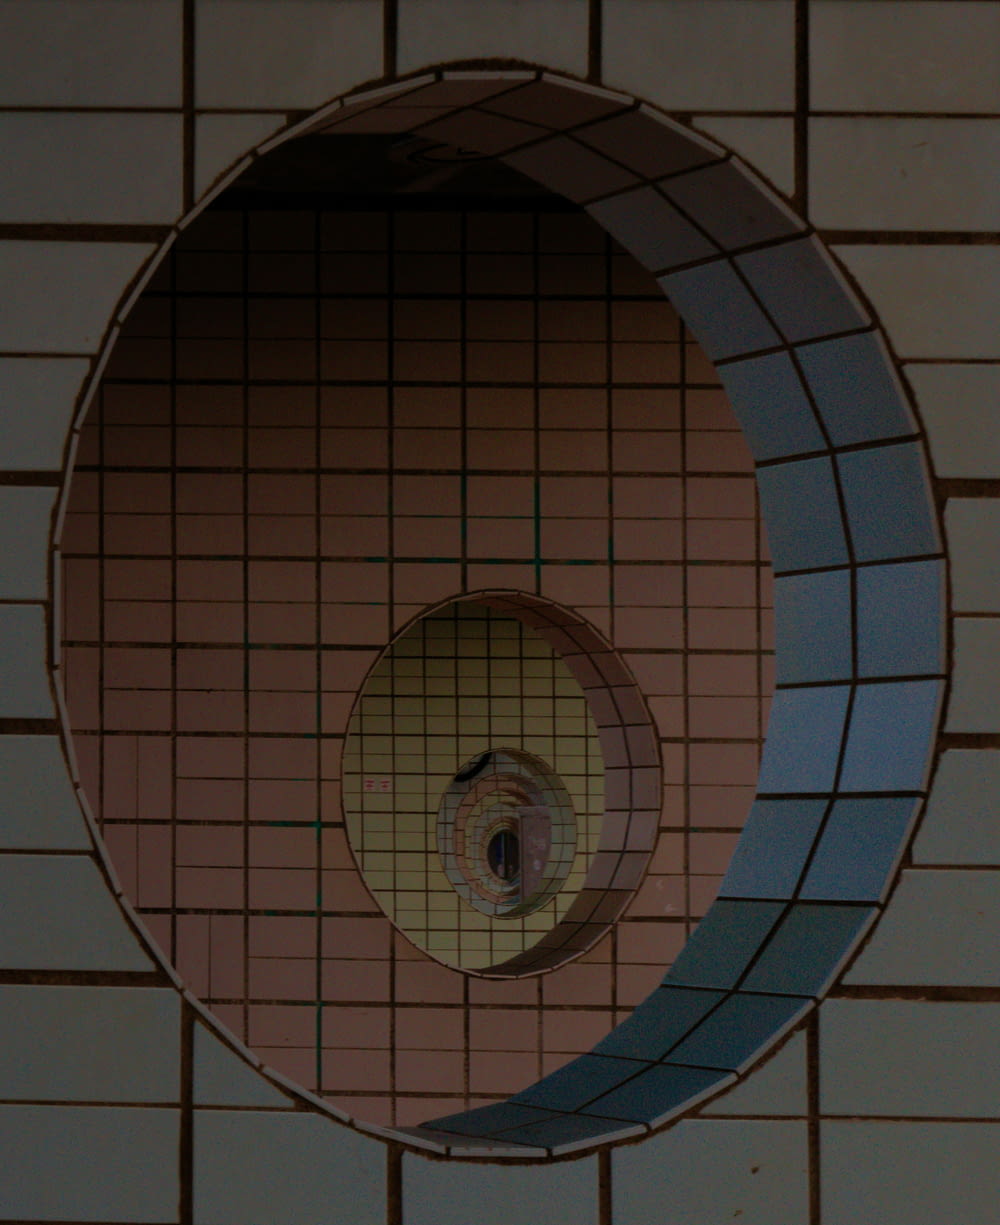 a round mirror on a tiled wall above a urinal